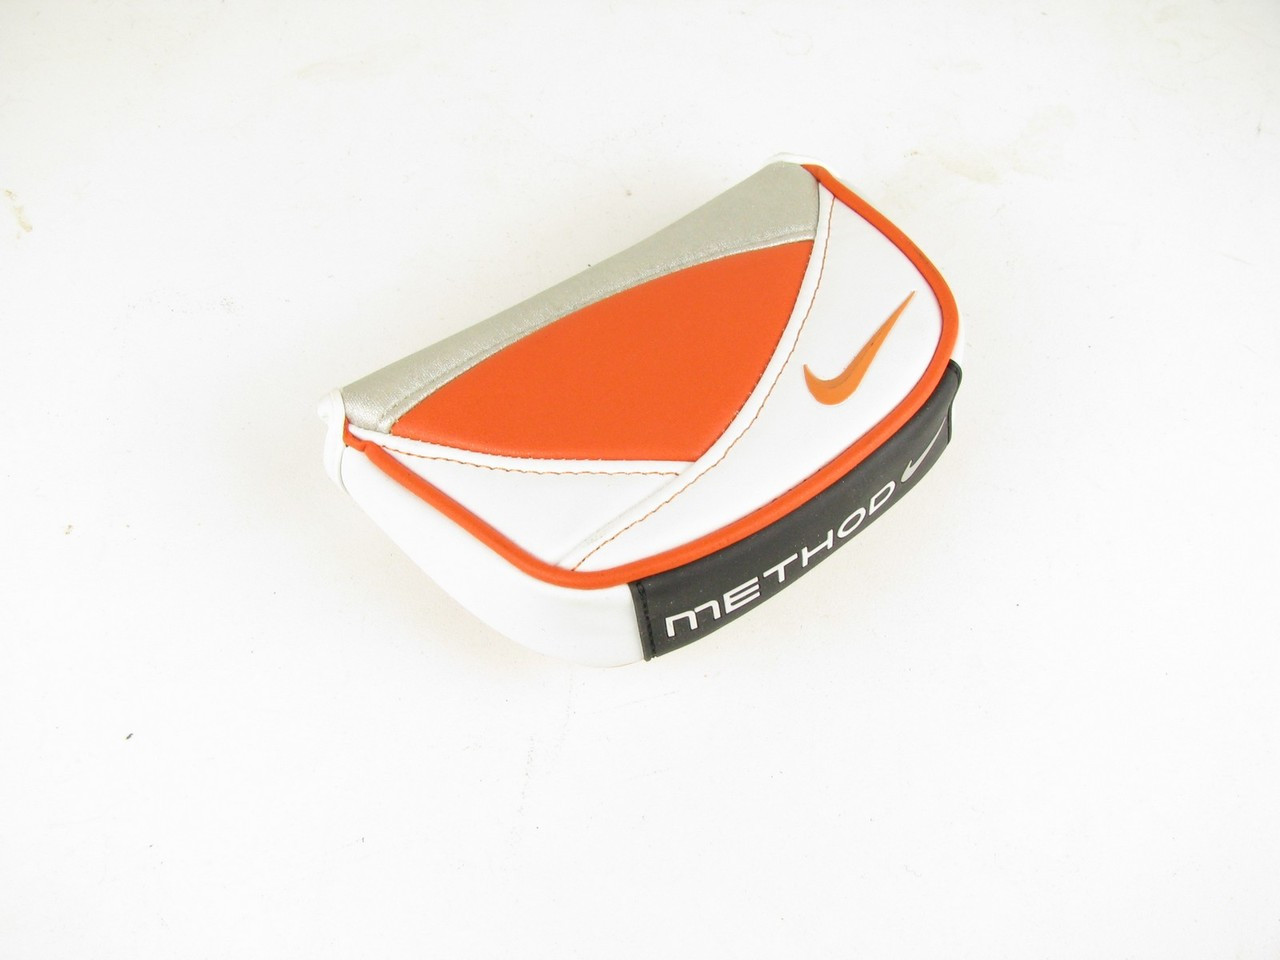 NEW Nike Method Concept Putter Headcover ORANGE - Clubs n Covers Golf